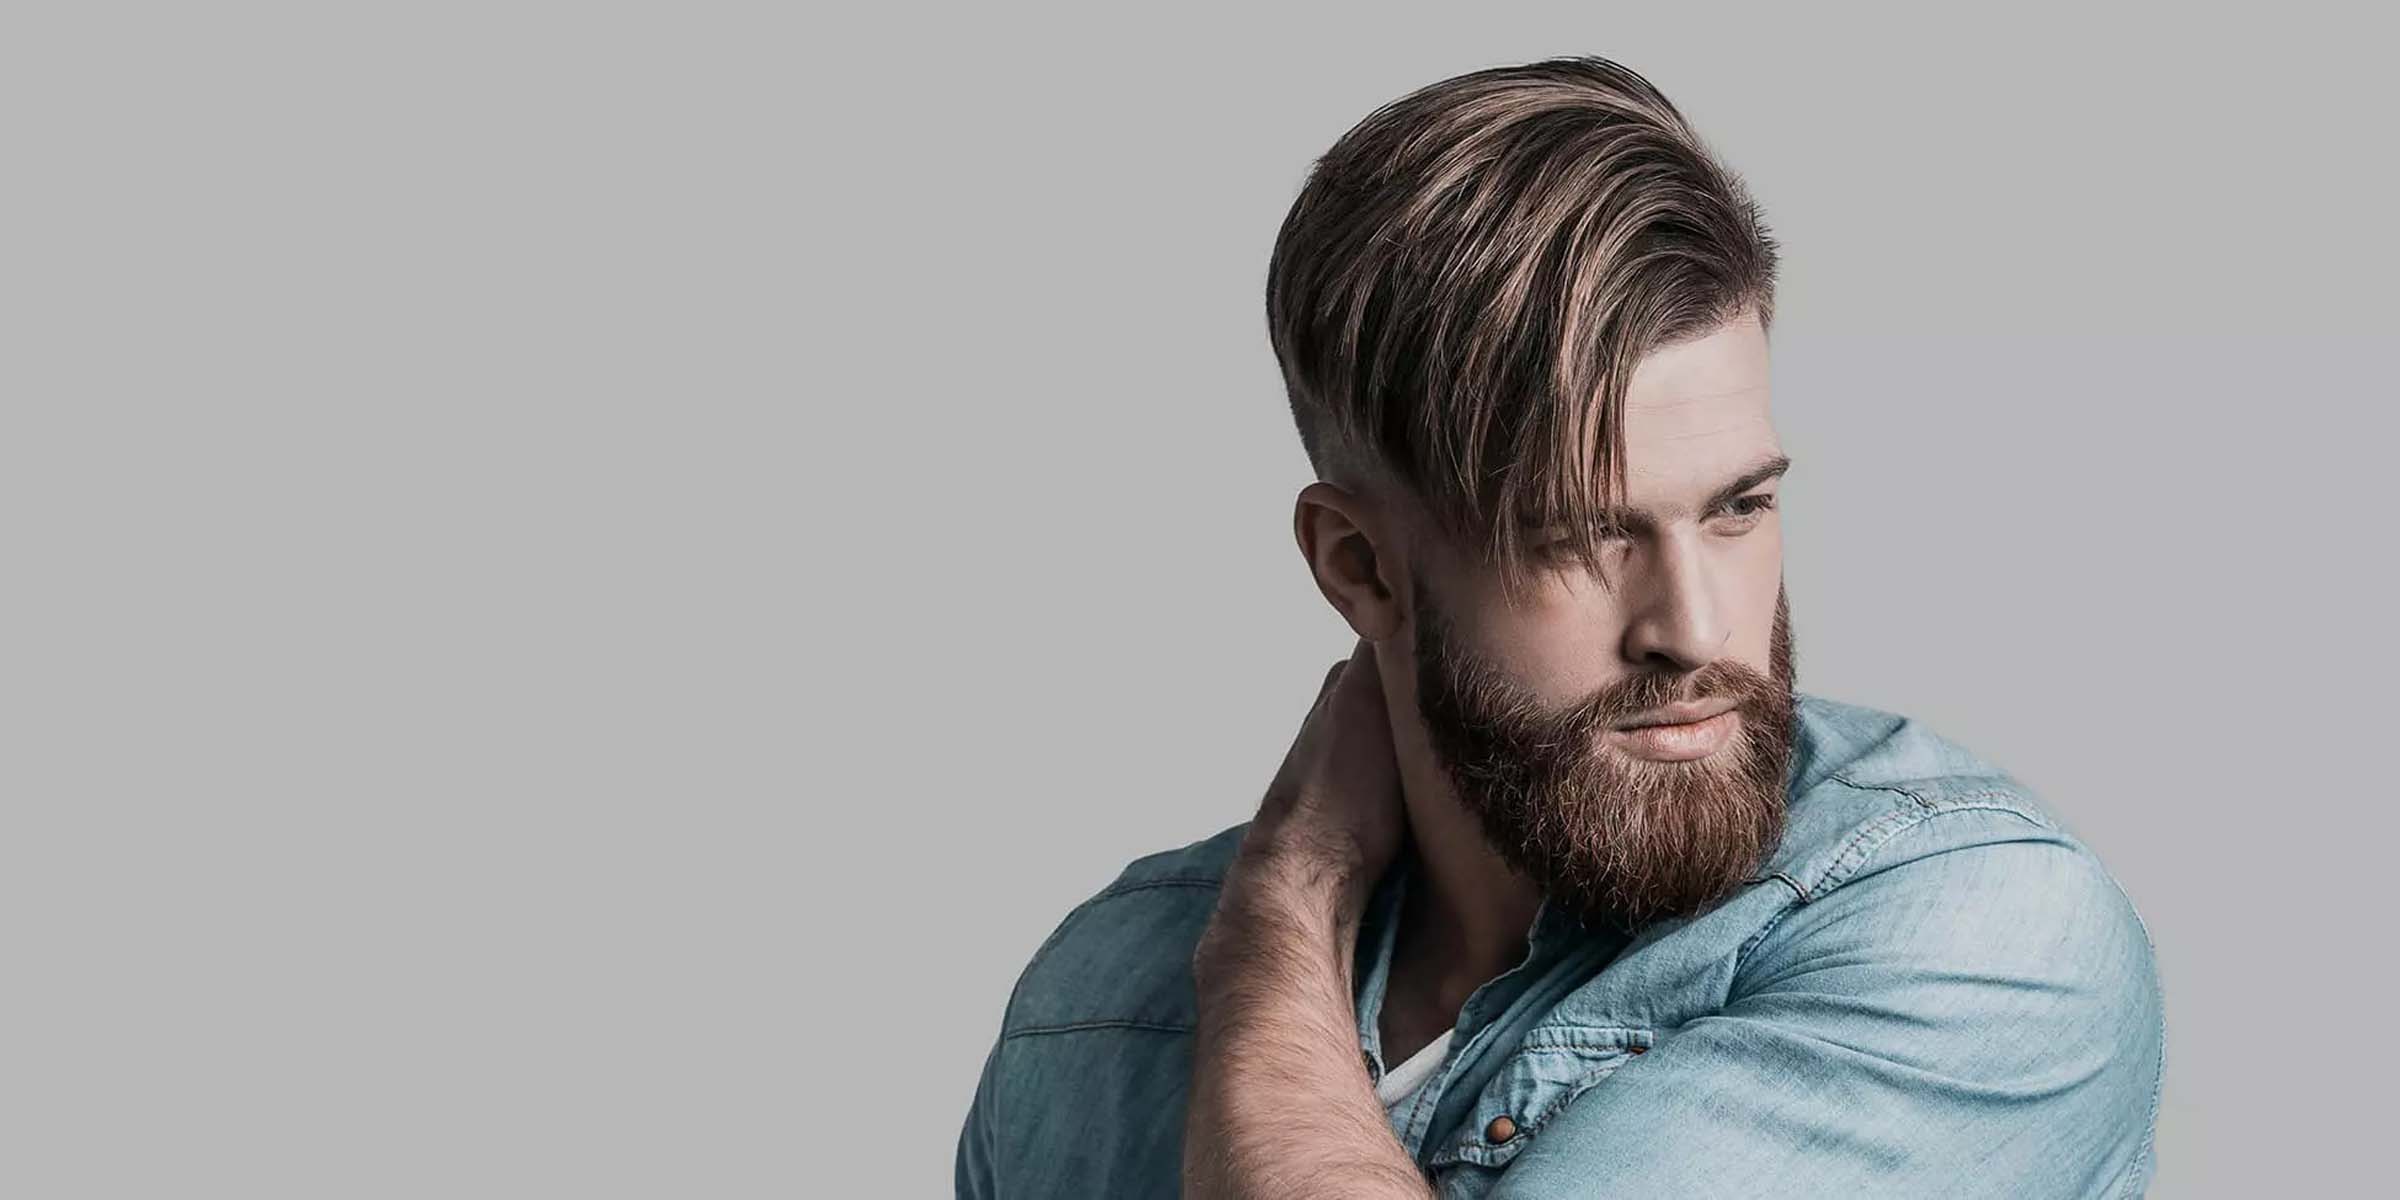 His bearded hair look styled. Bearded man outdoor. Bearded hipster in  casual business style. Brutal guy wear mustache and beard on bearded face.  Barbershop. Beard grooming Photos | Adobe Stock